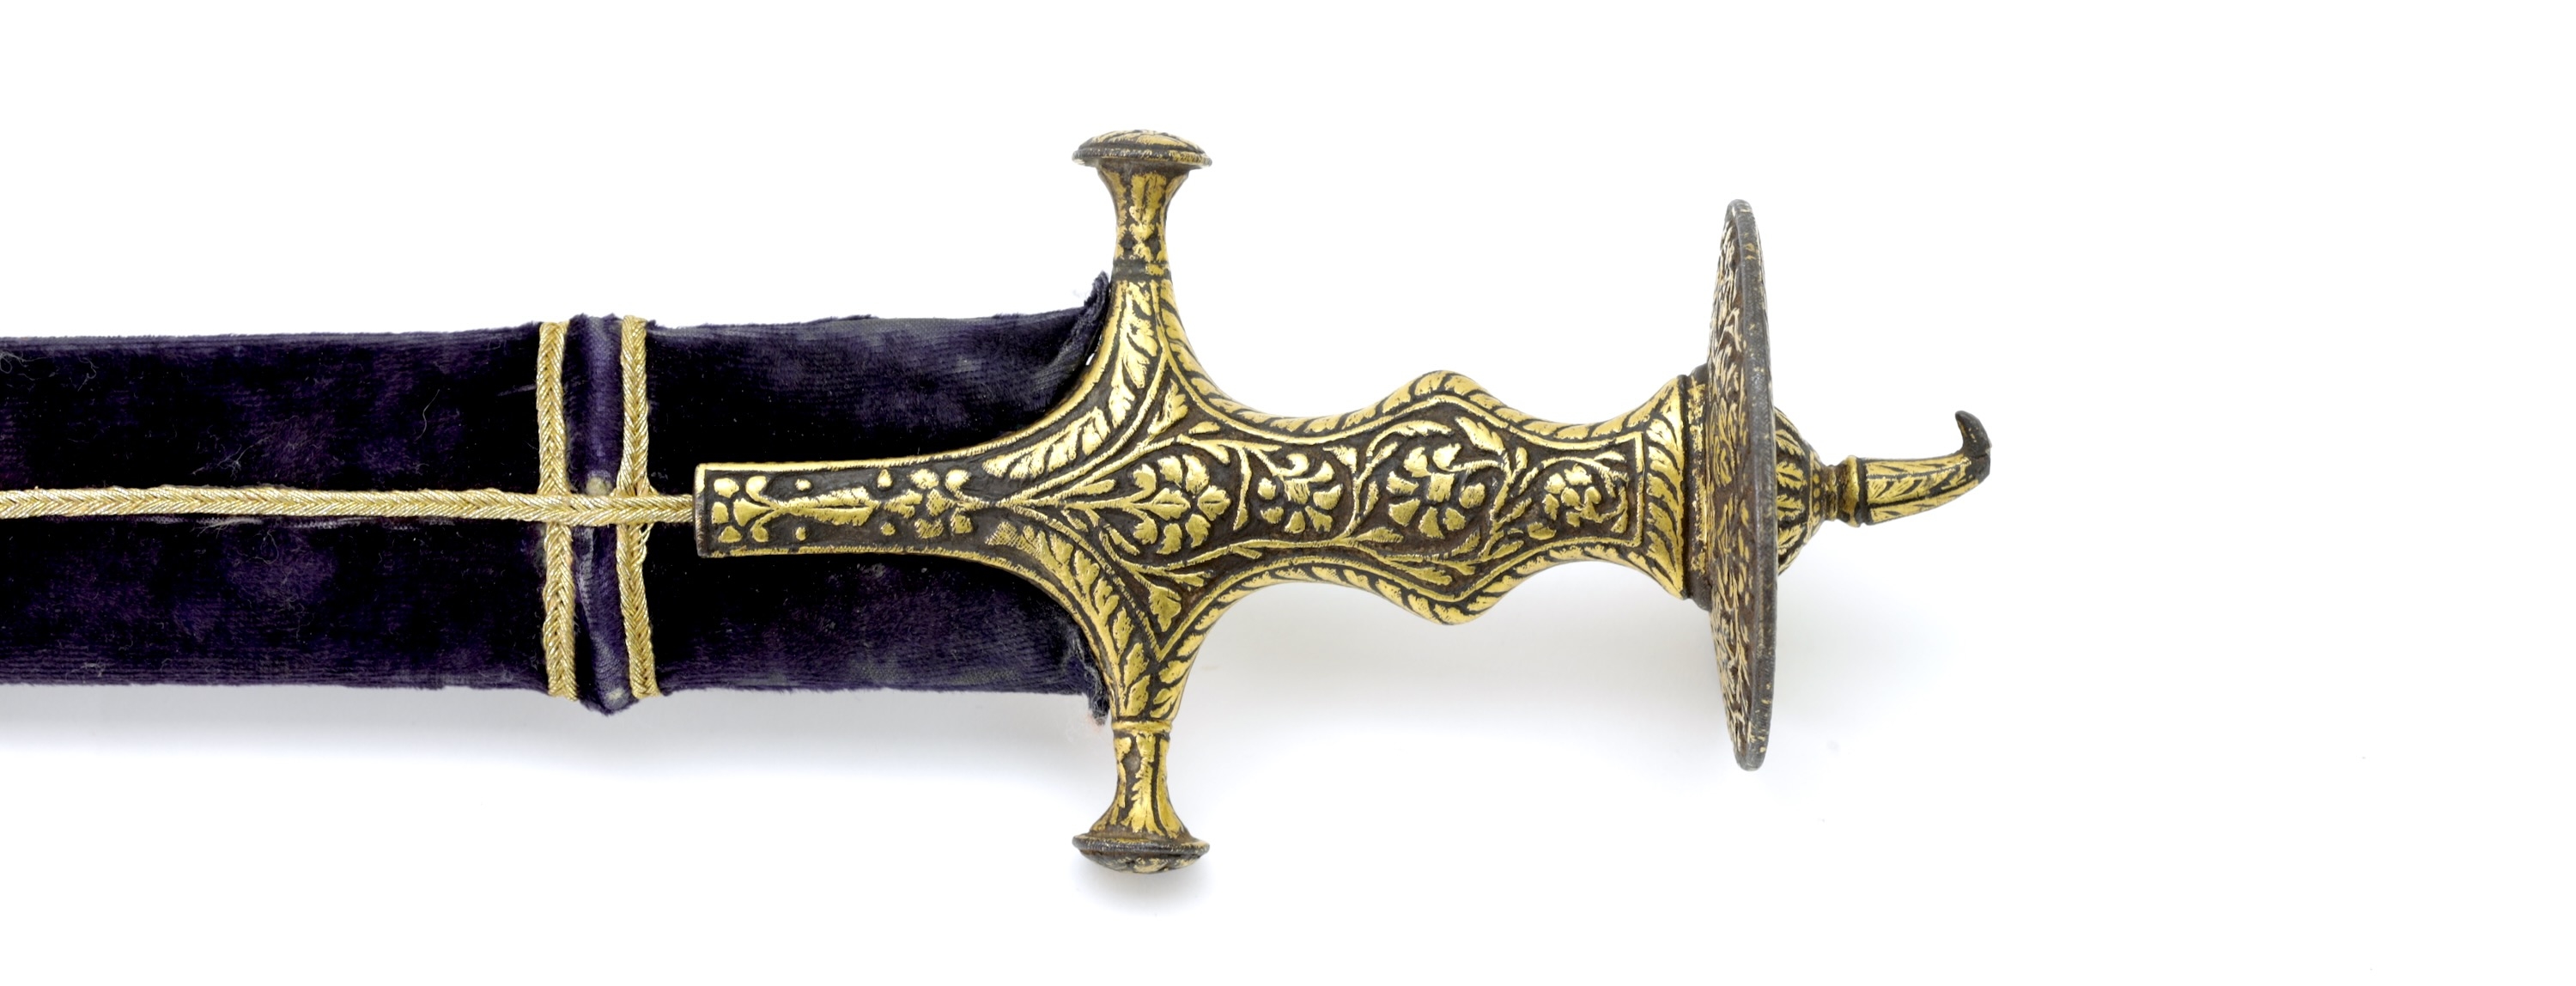 North Indian kirach with dated hilt